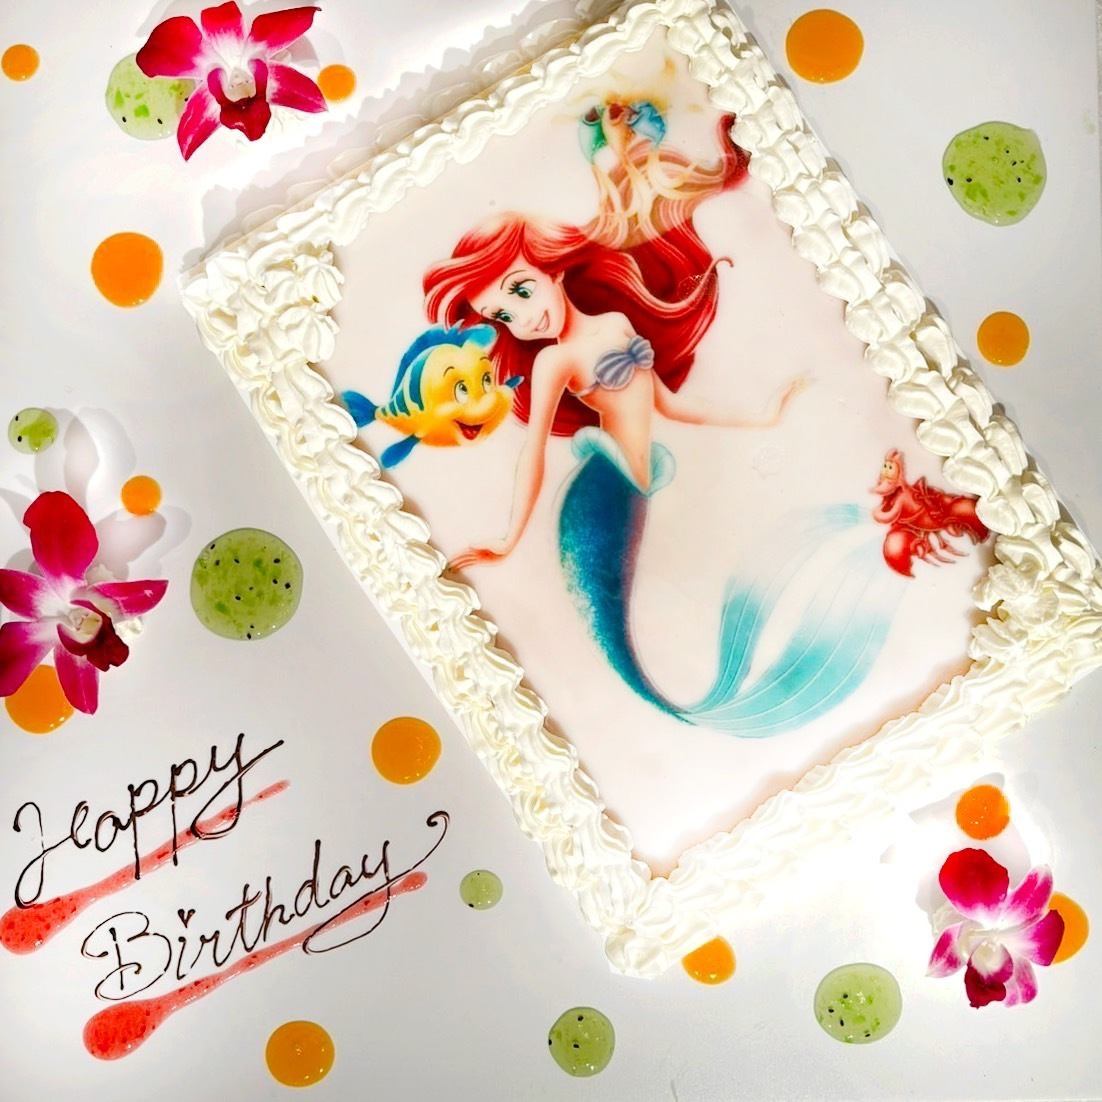 Create a cake right in front of your eyes★Table art & table slide show!